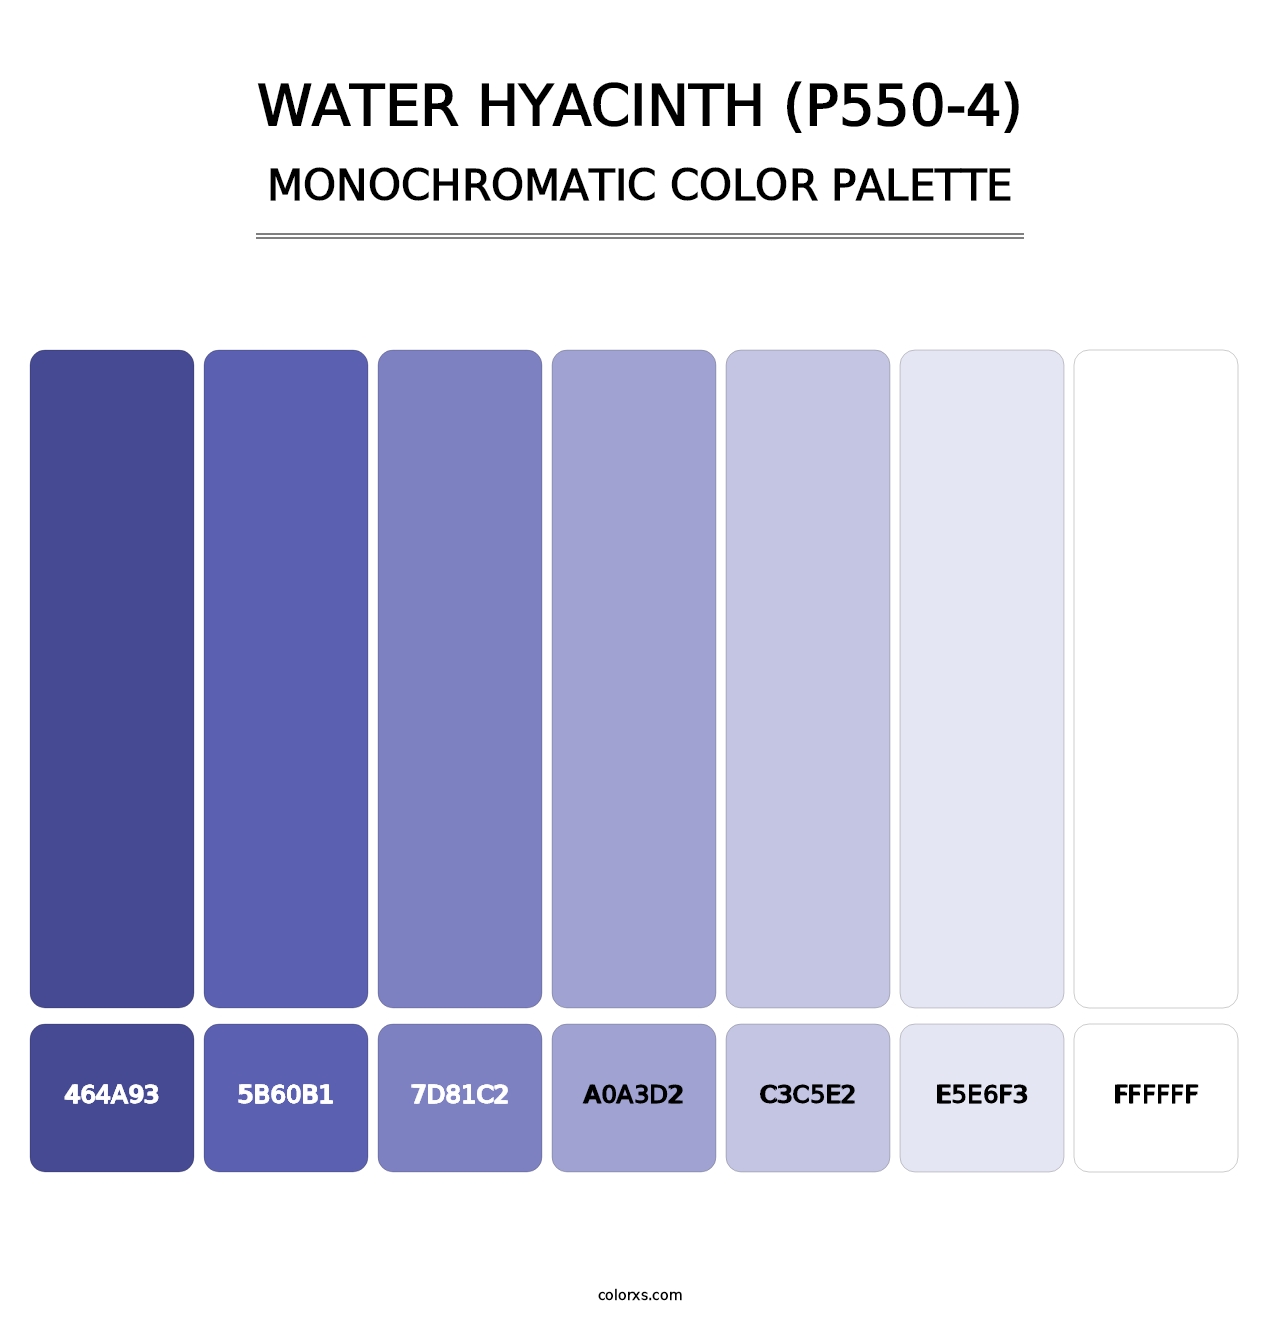 Water Hyacinth (P550-4) - Monochromatic Color Palette